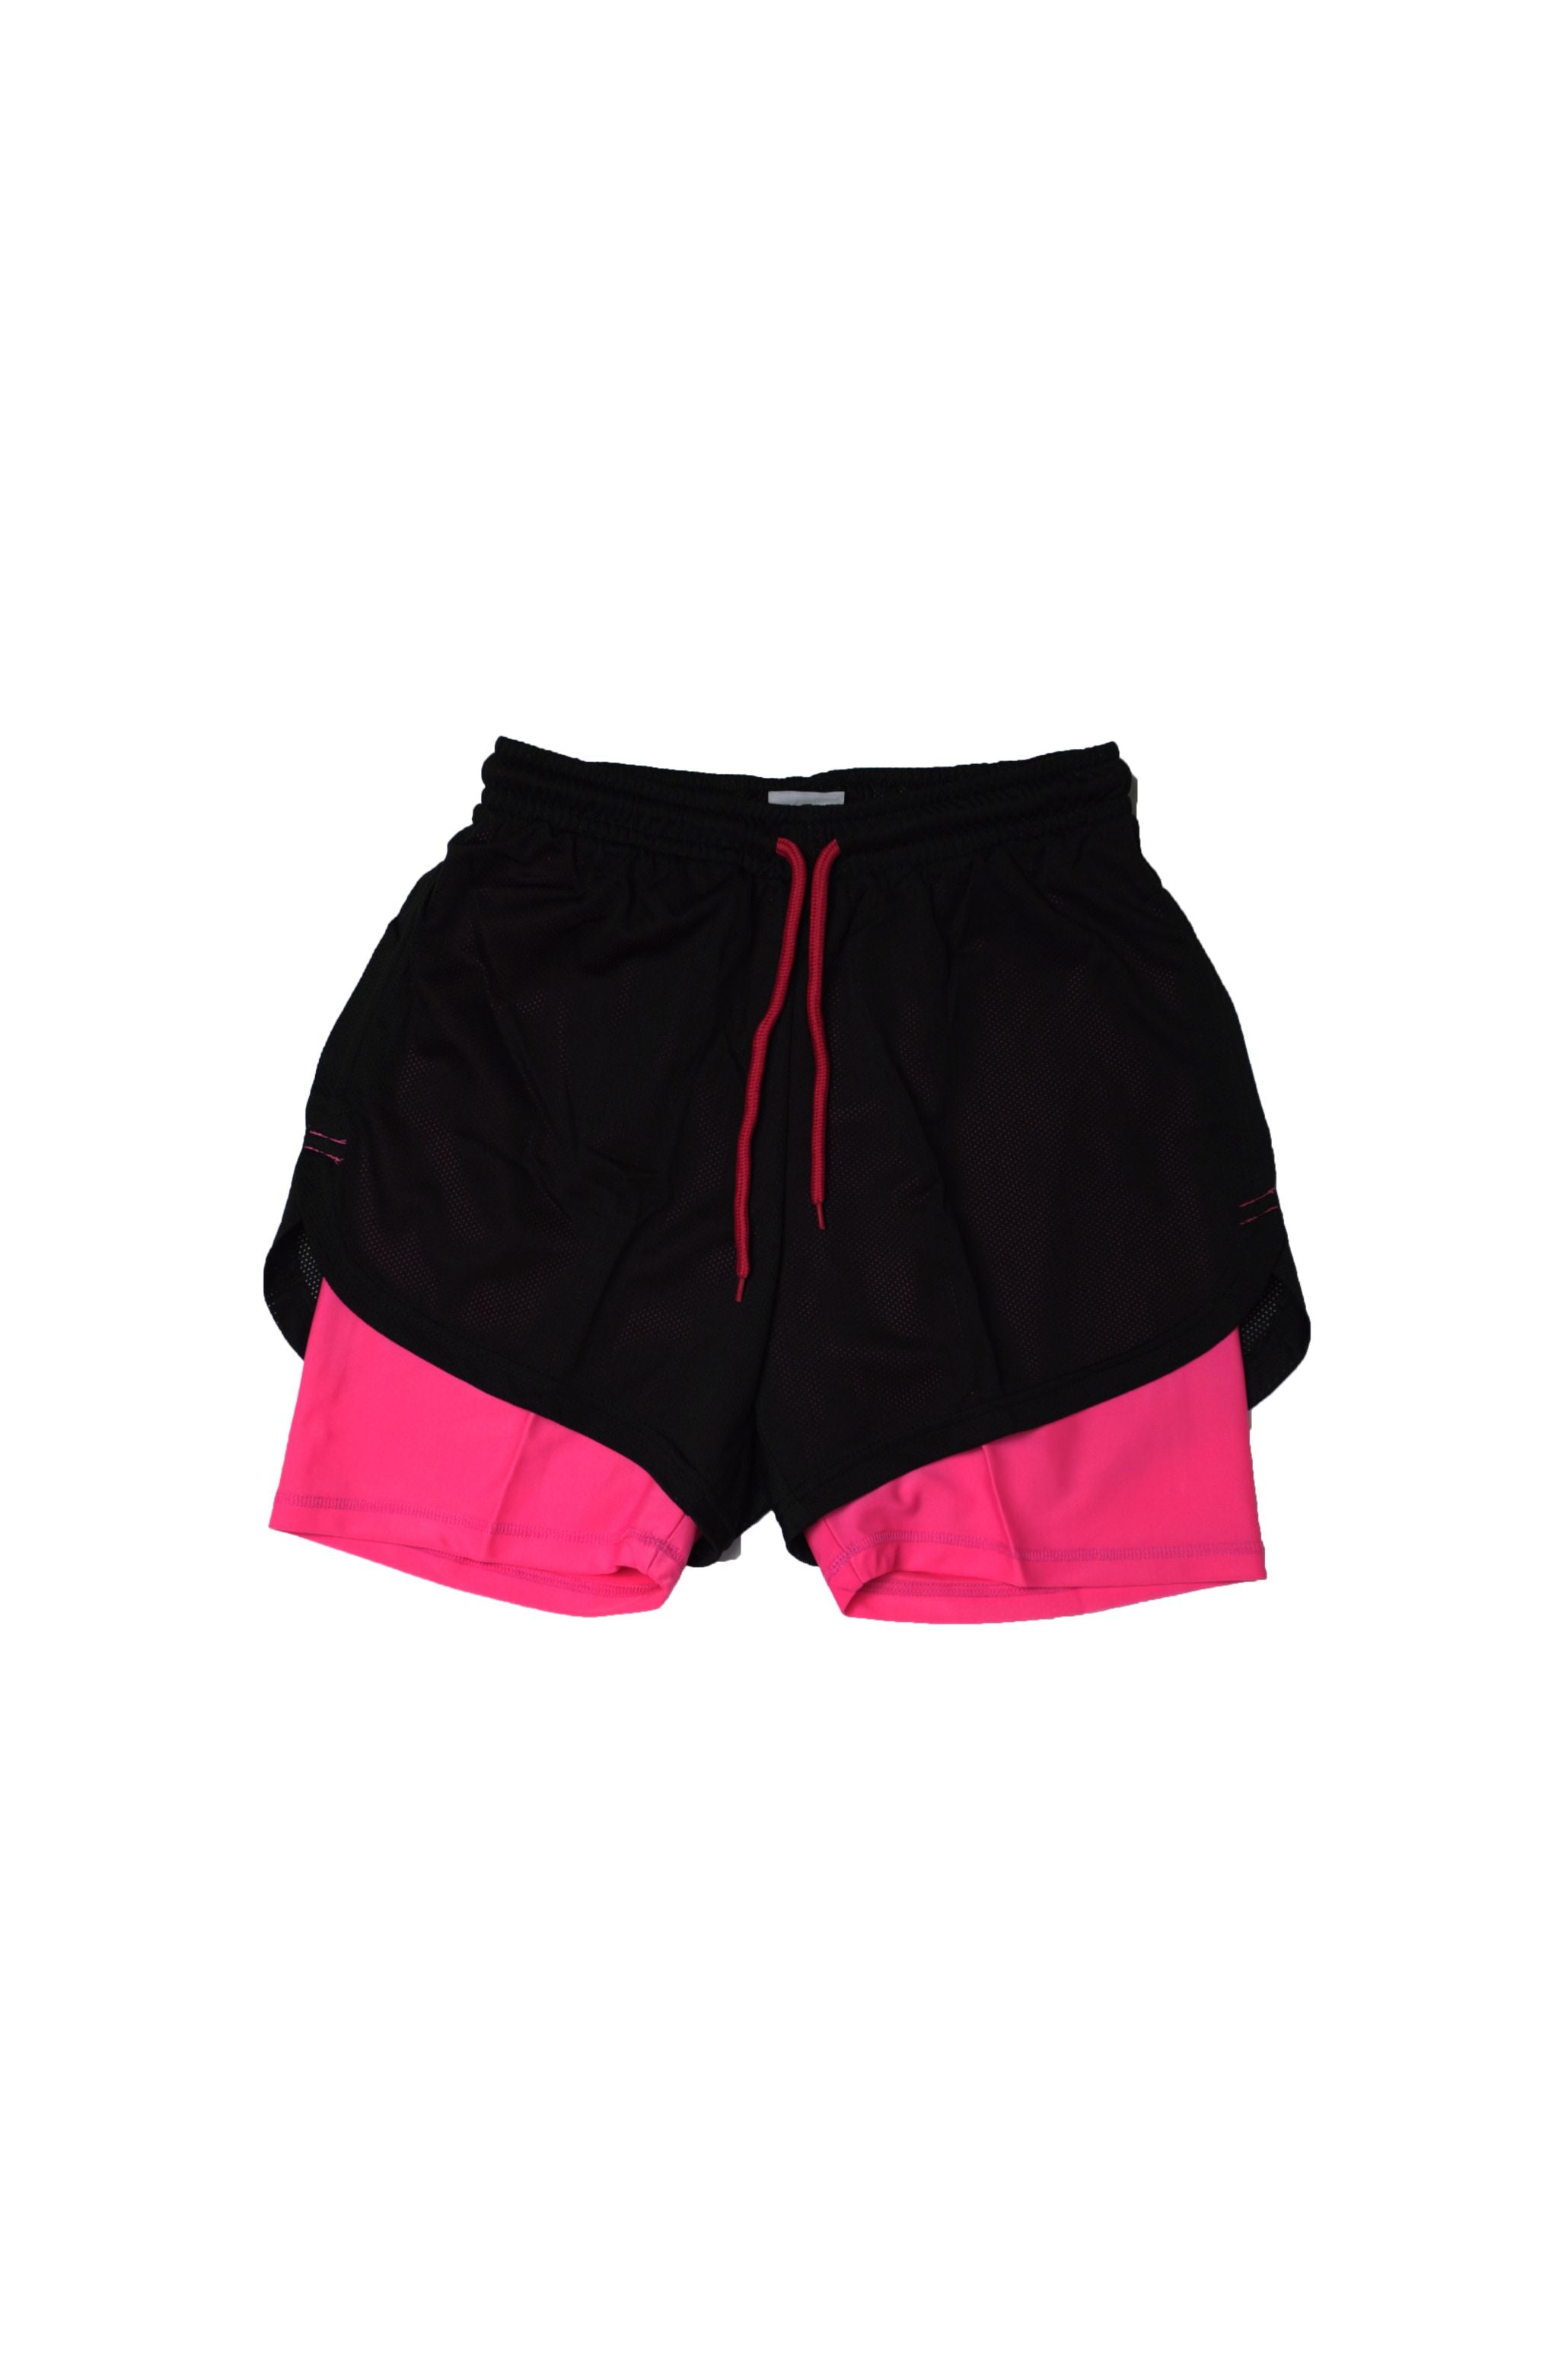 WOMEN FITNESS SHORTS BLACK AND PINK